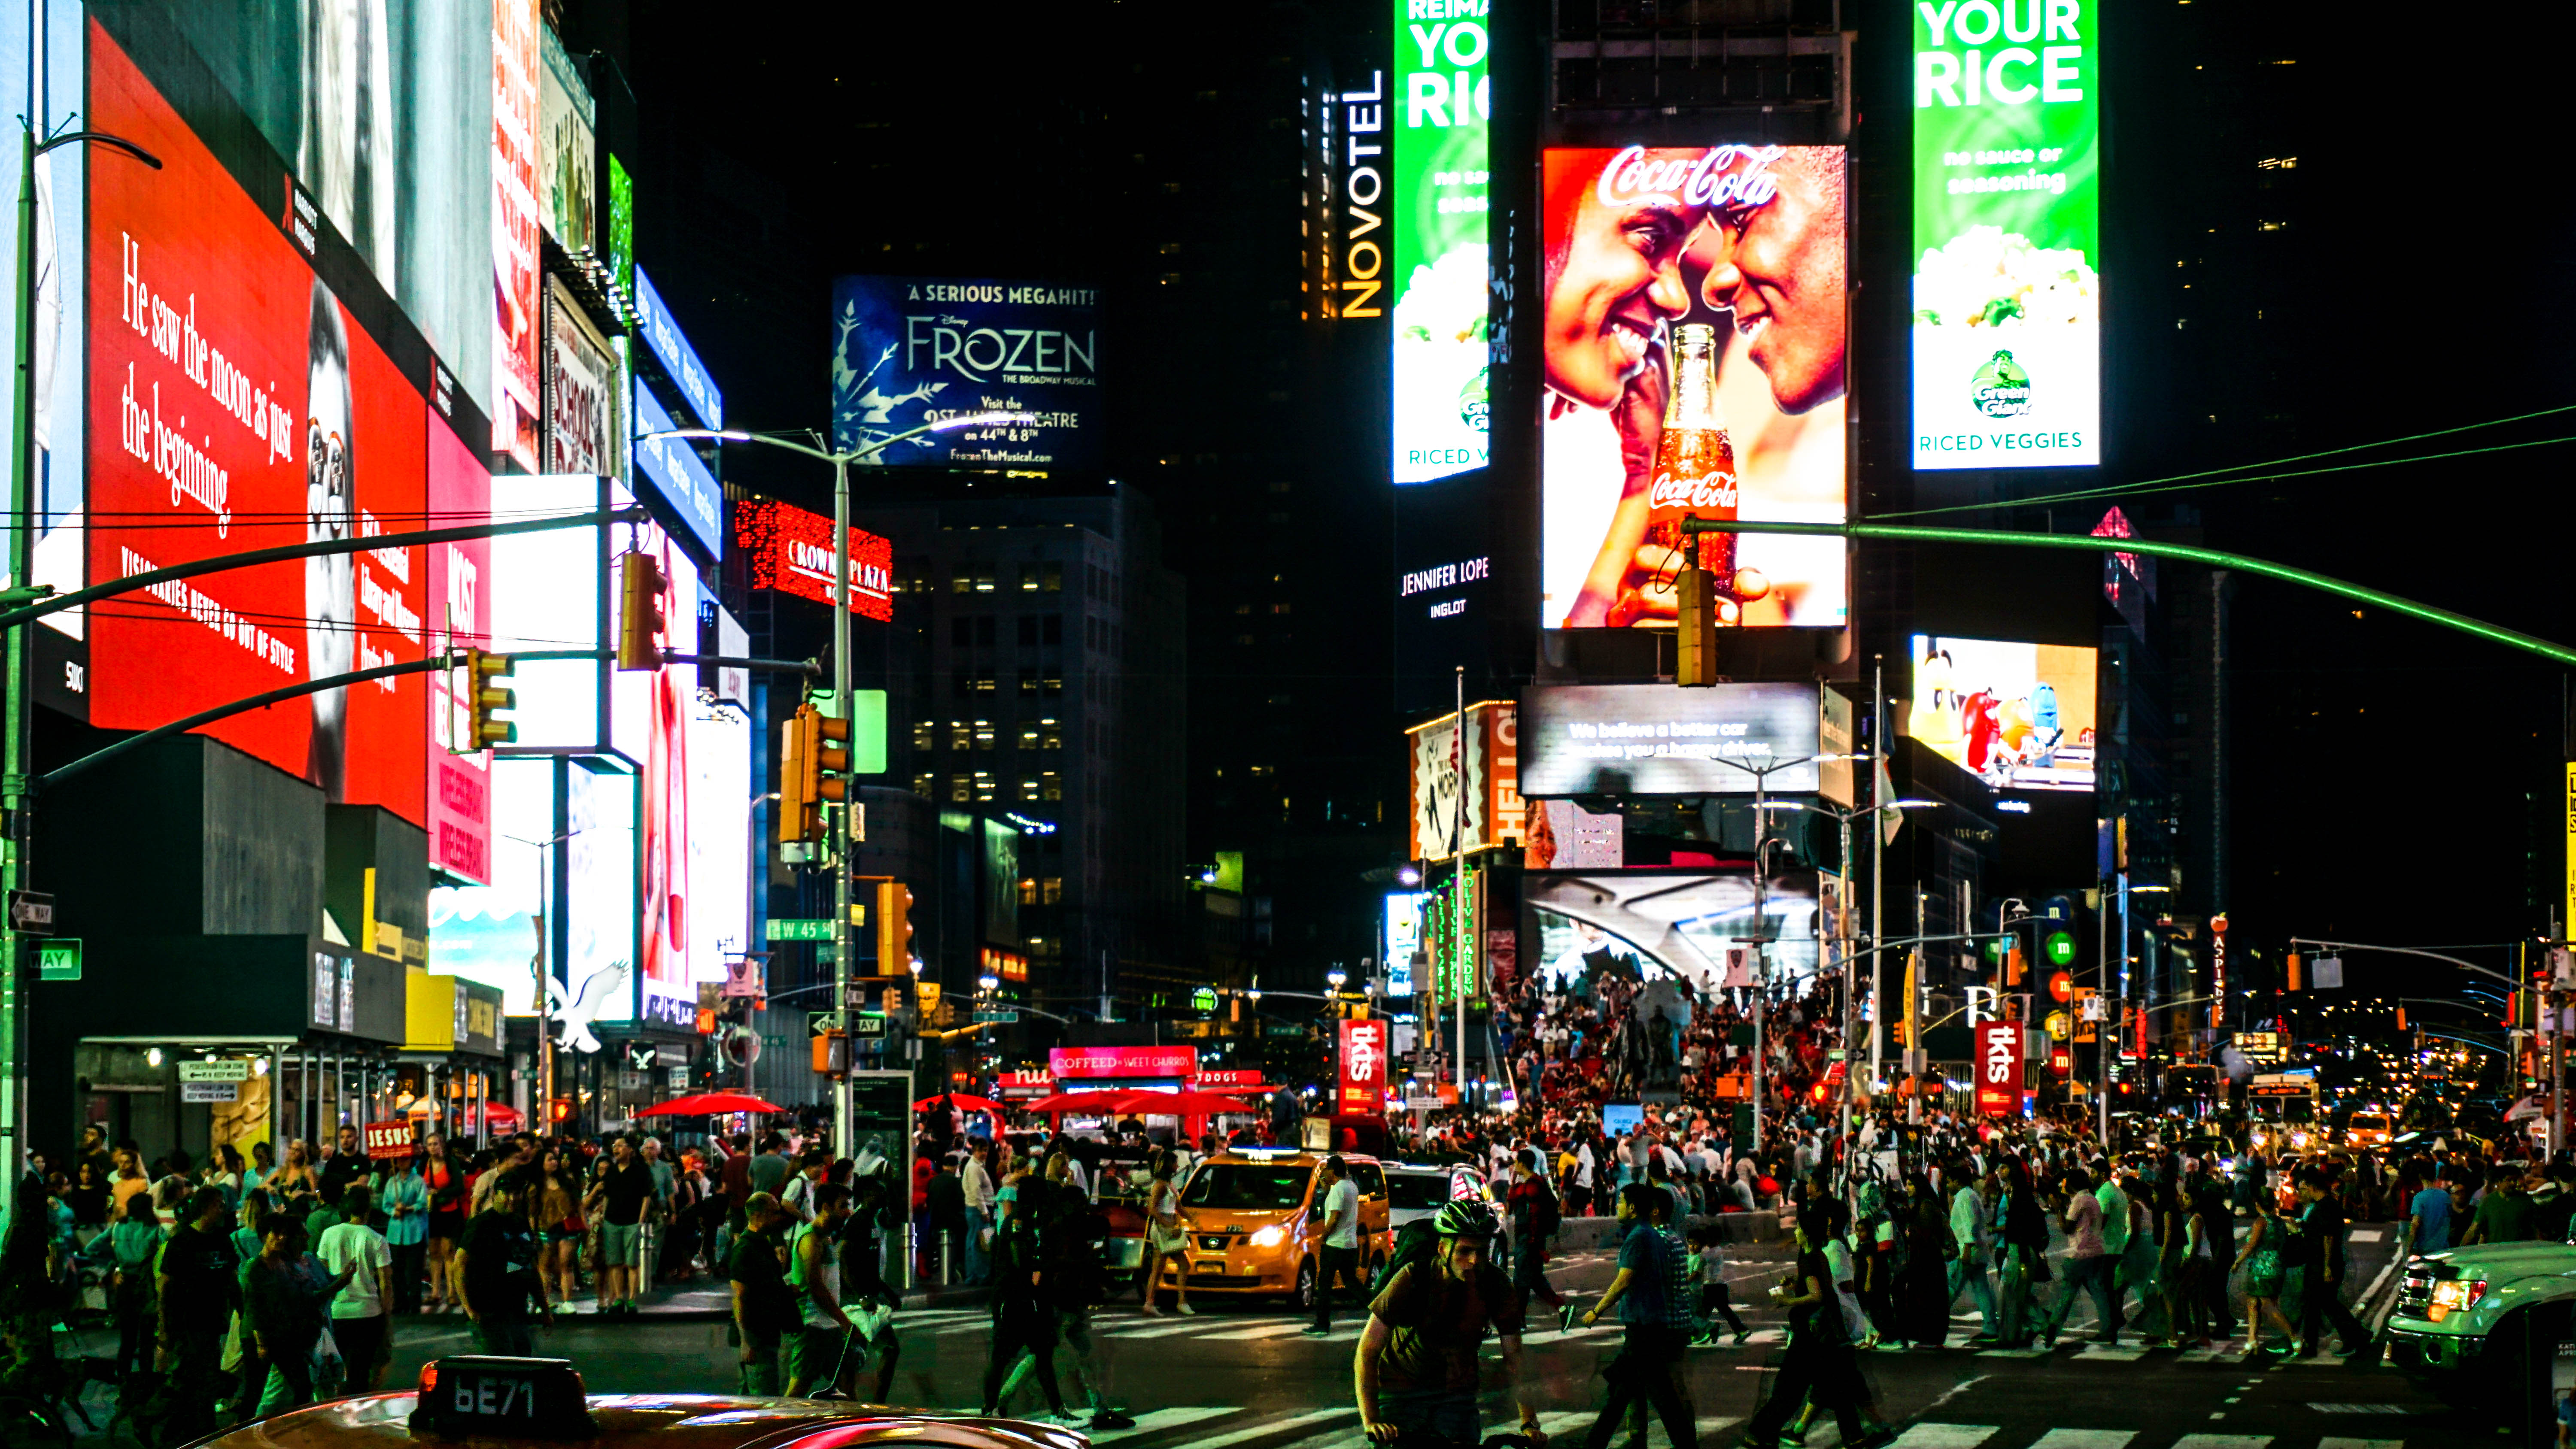 Image: Time Square at night.